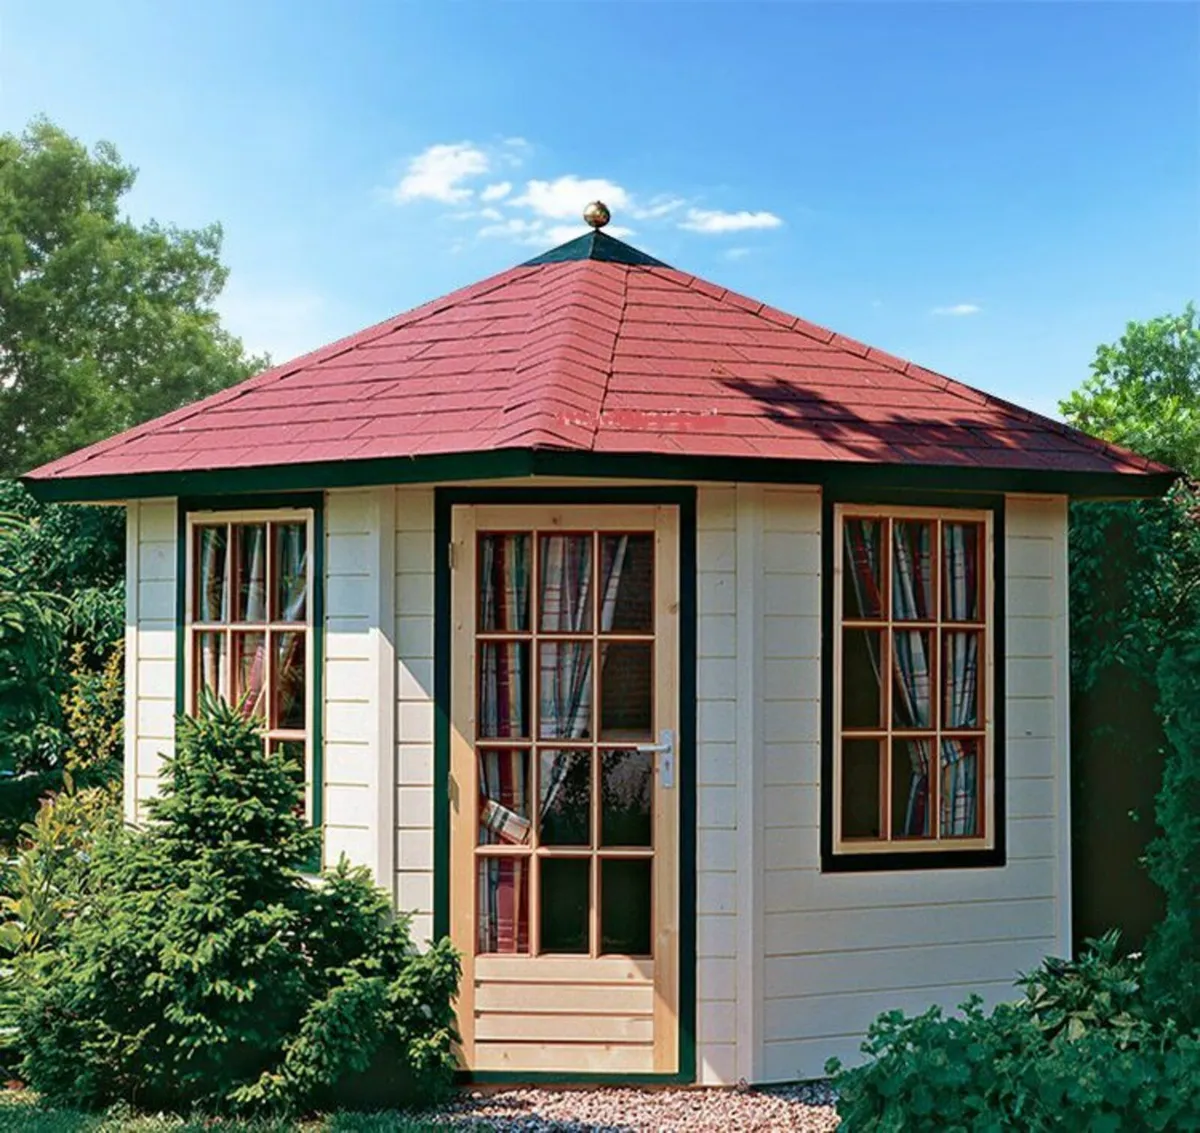 Clearance sale on Garden rooms , Final Reductions!